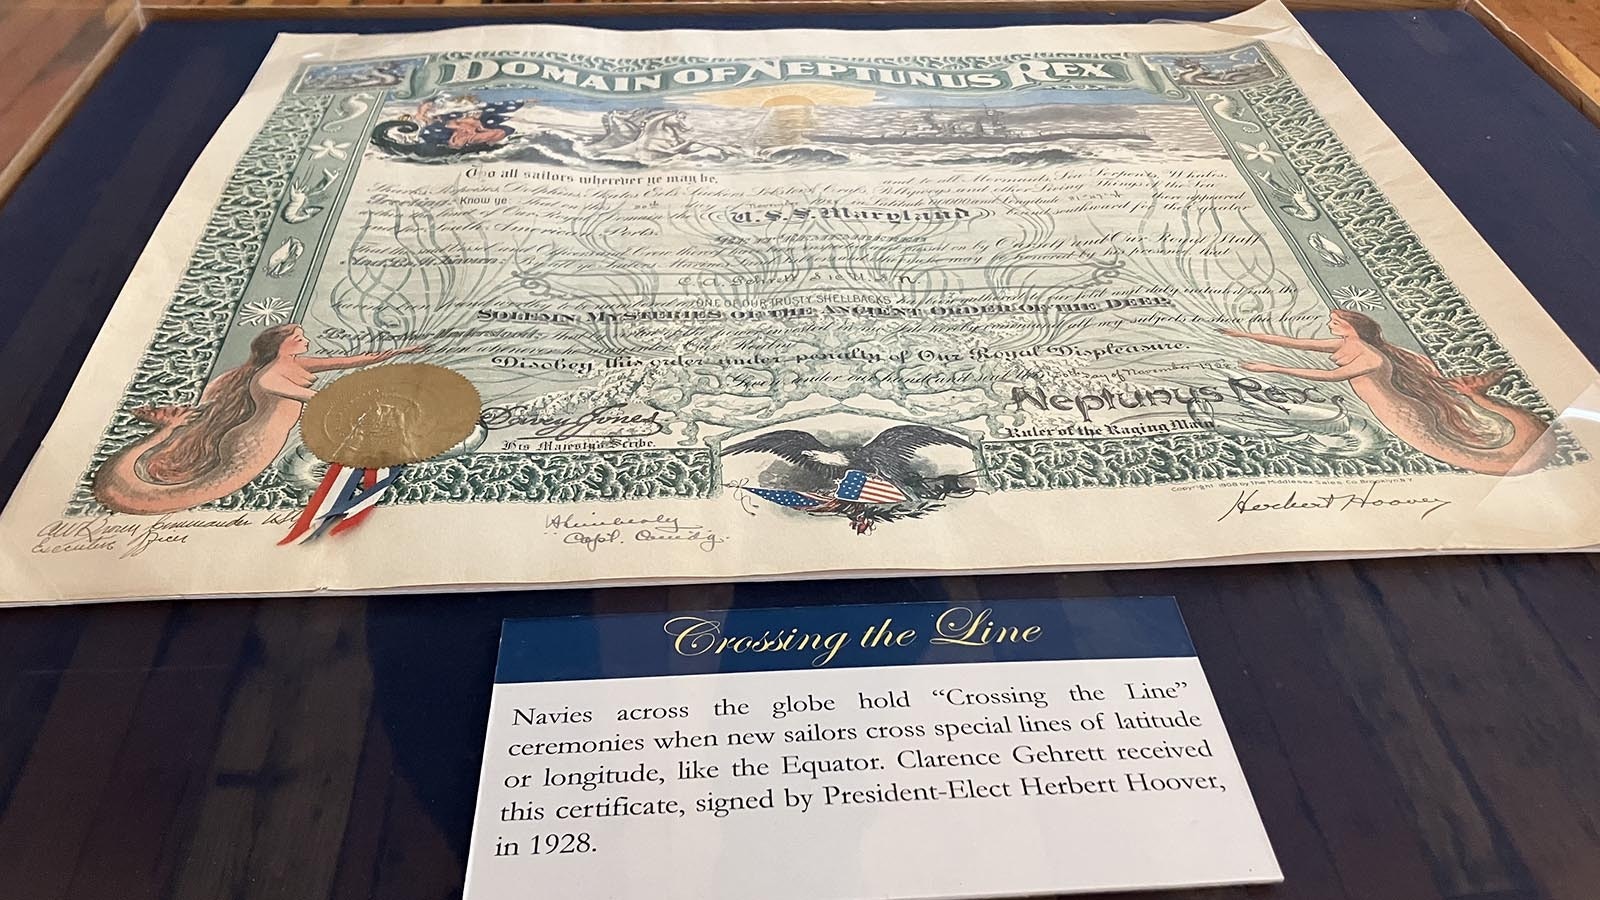 Clarence Gehrett’s certificate for crossing the equator while on the USS Maryland. It was signed in the right corner by Herbert Hoover.